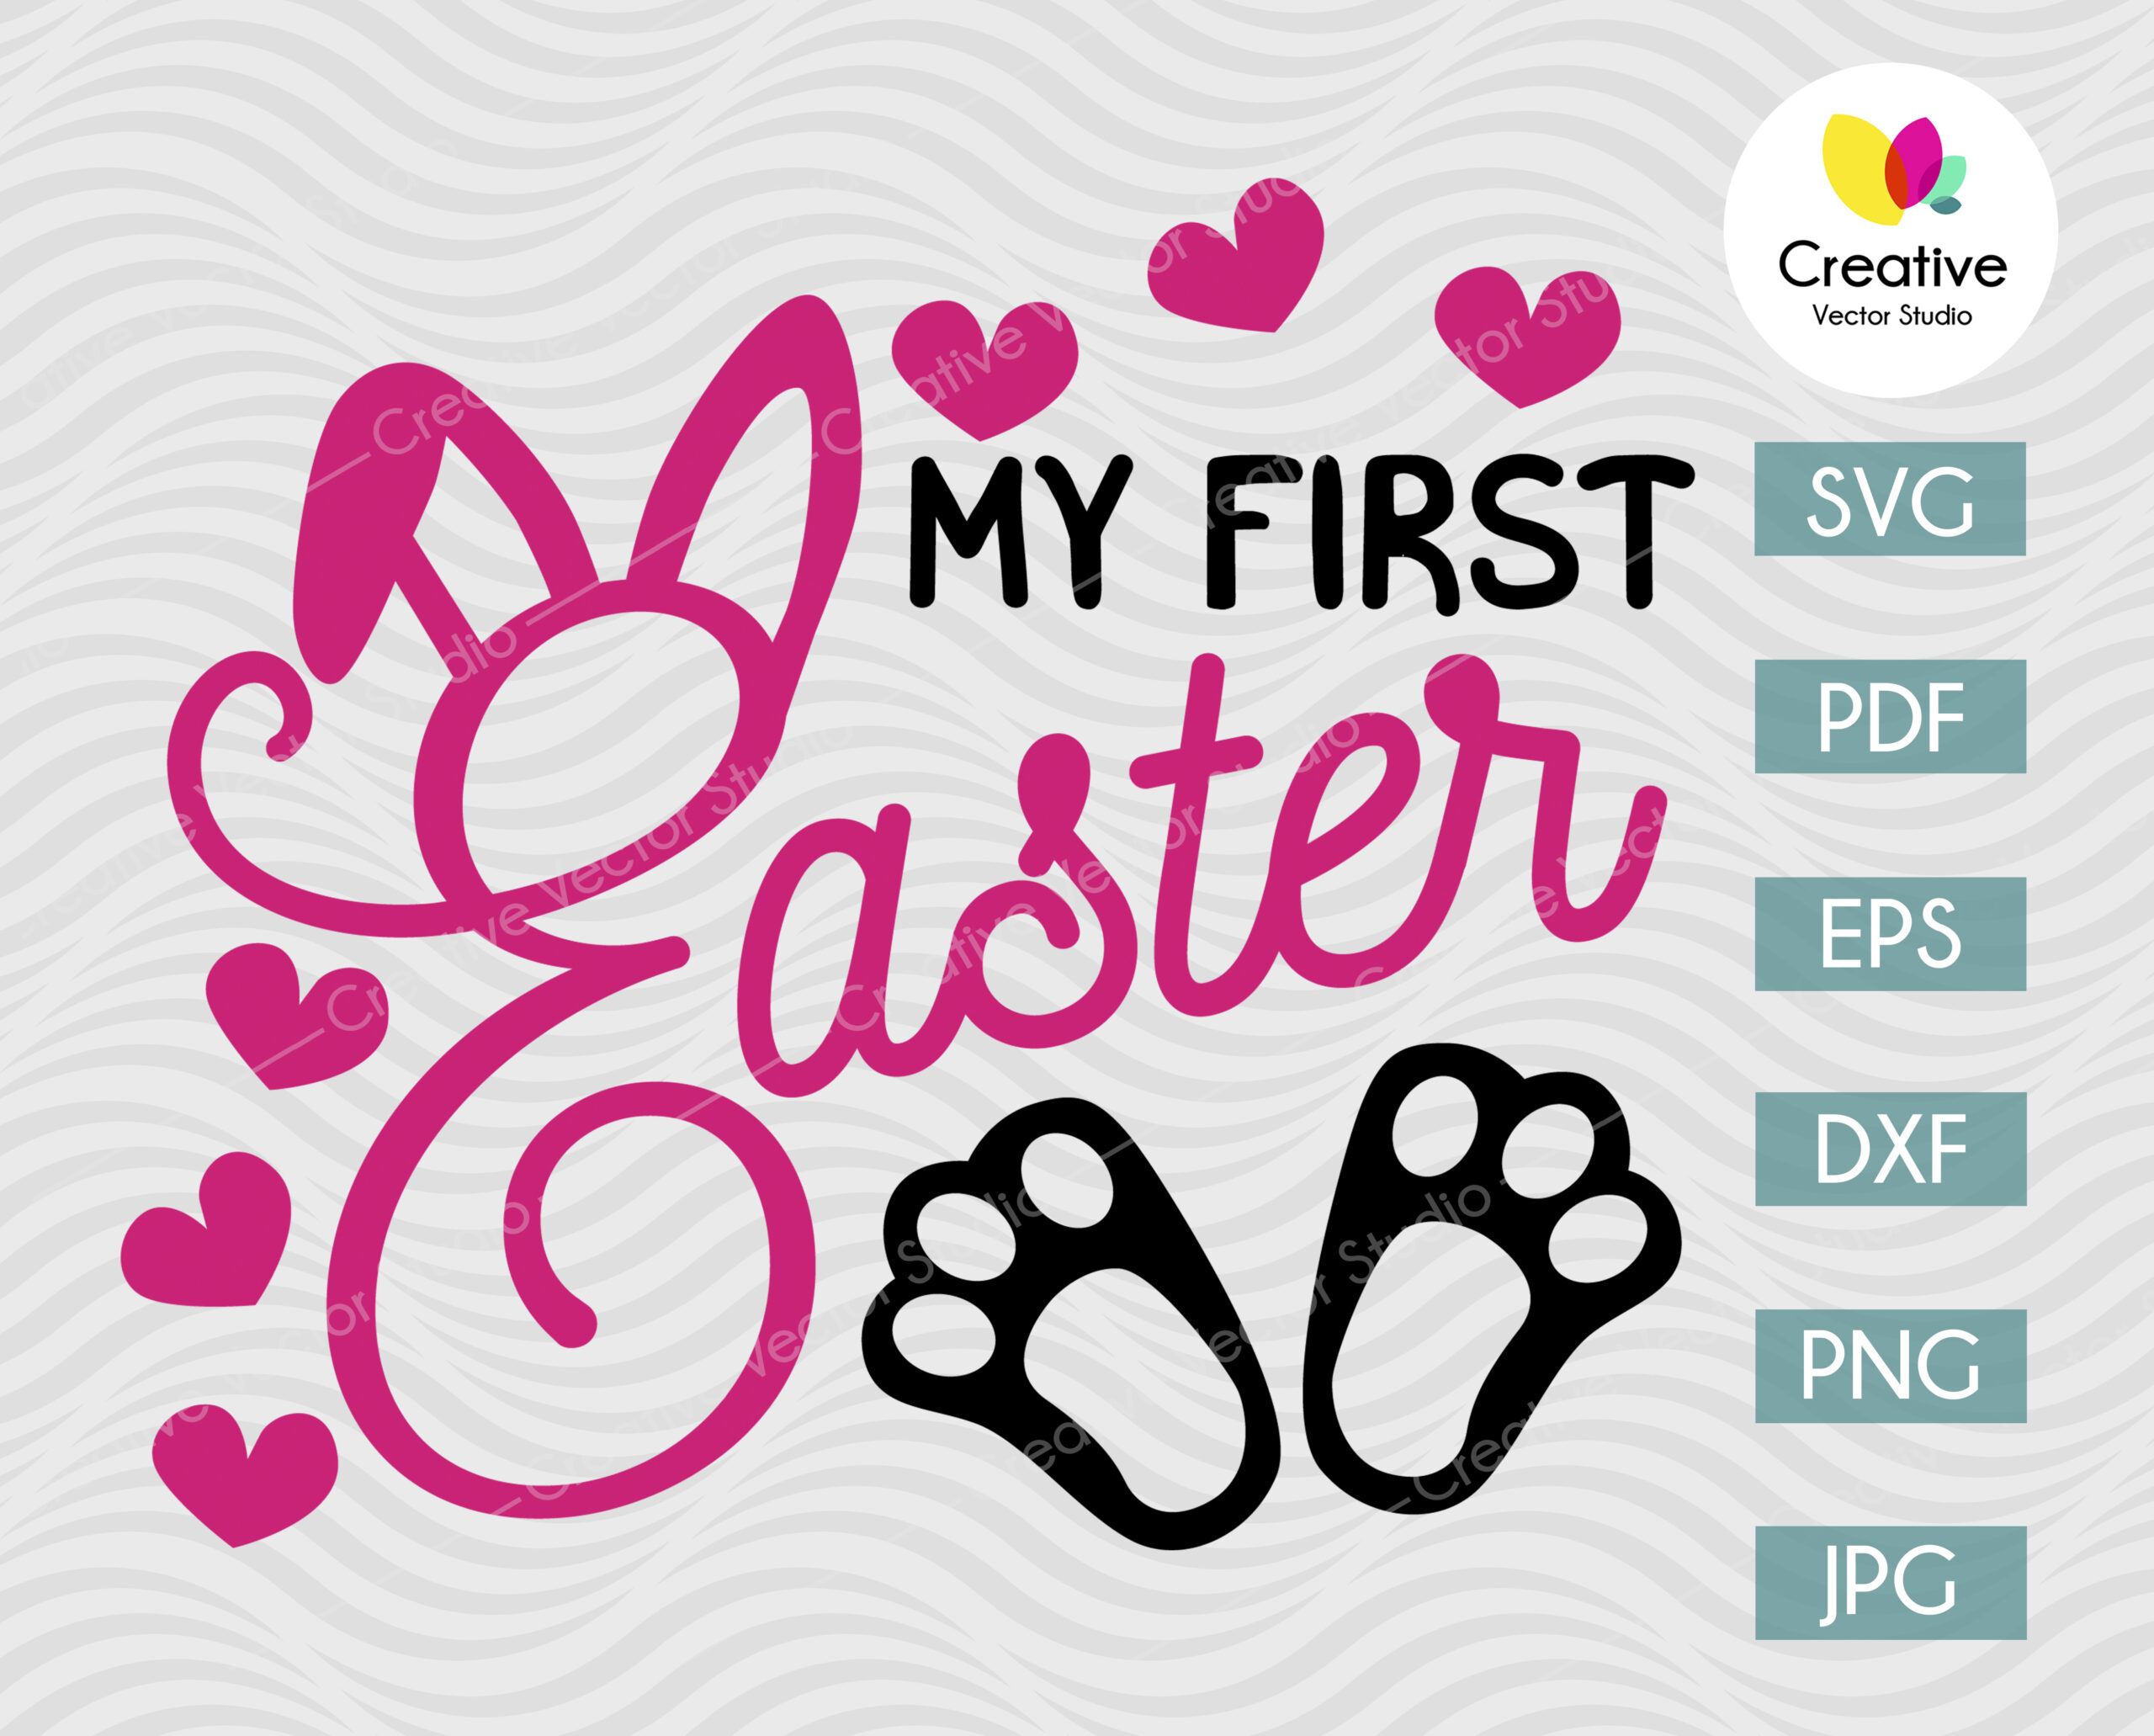 My First Easter SVG, PNG, DXF Cut File | Creative Vector Studio